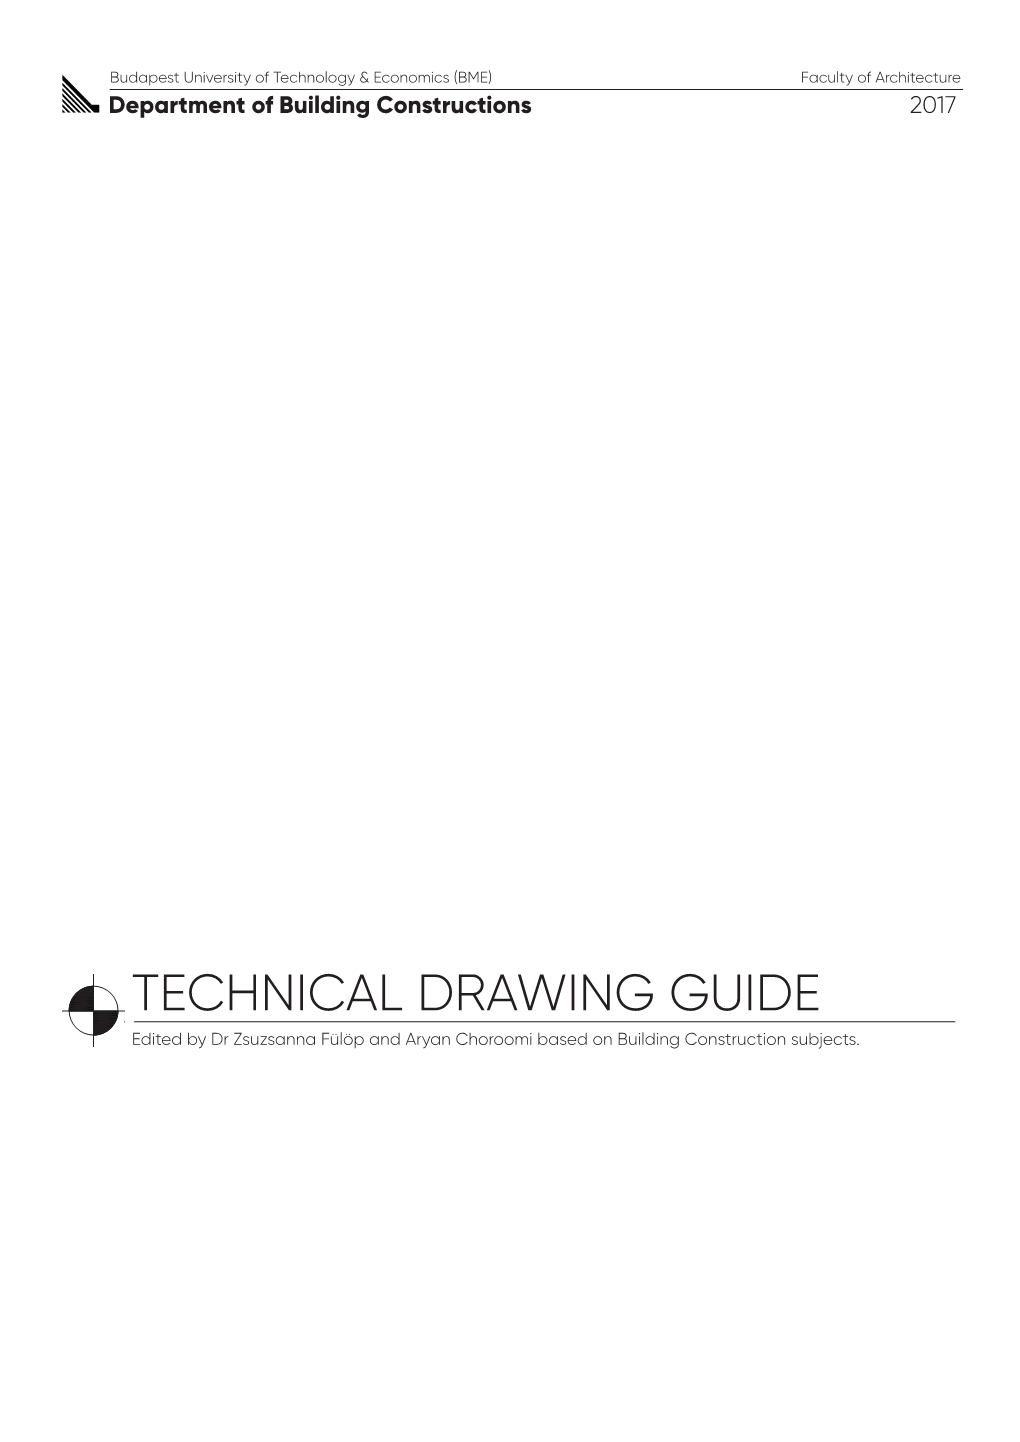 TECHNICAL DRAWING GUIDE + 3,20 Edited by Dr Zsuzsanna Fülöp and Aryan Choroomi Based on Building Construction Subjects